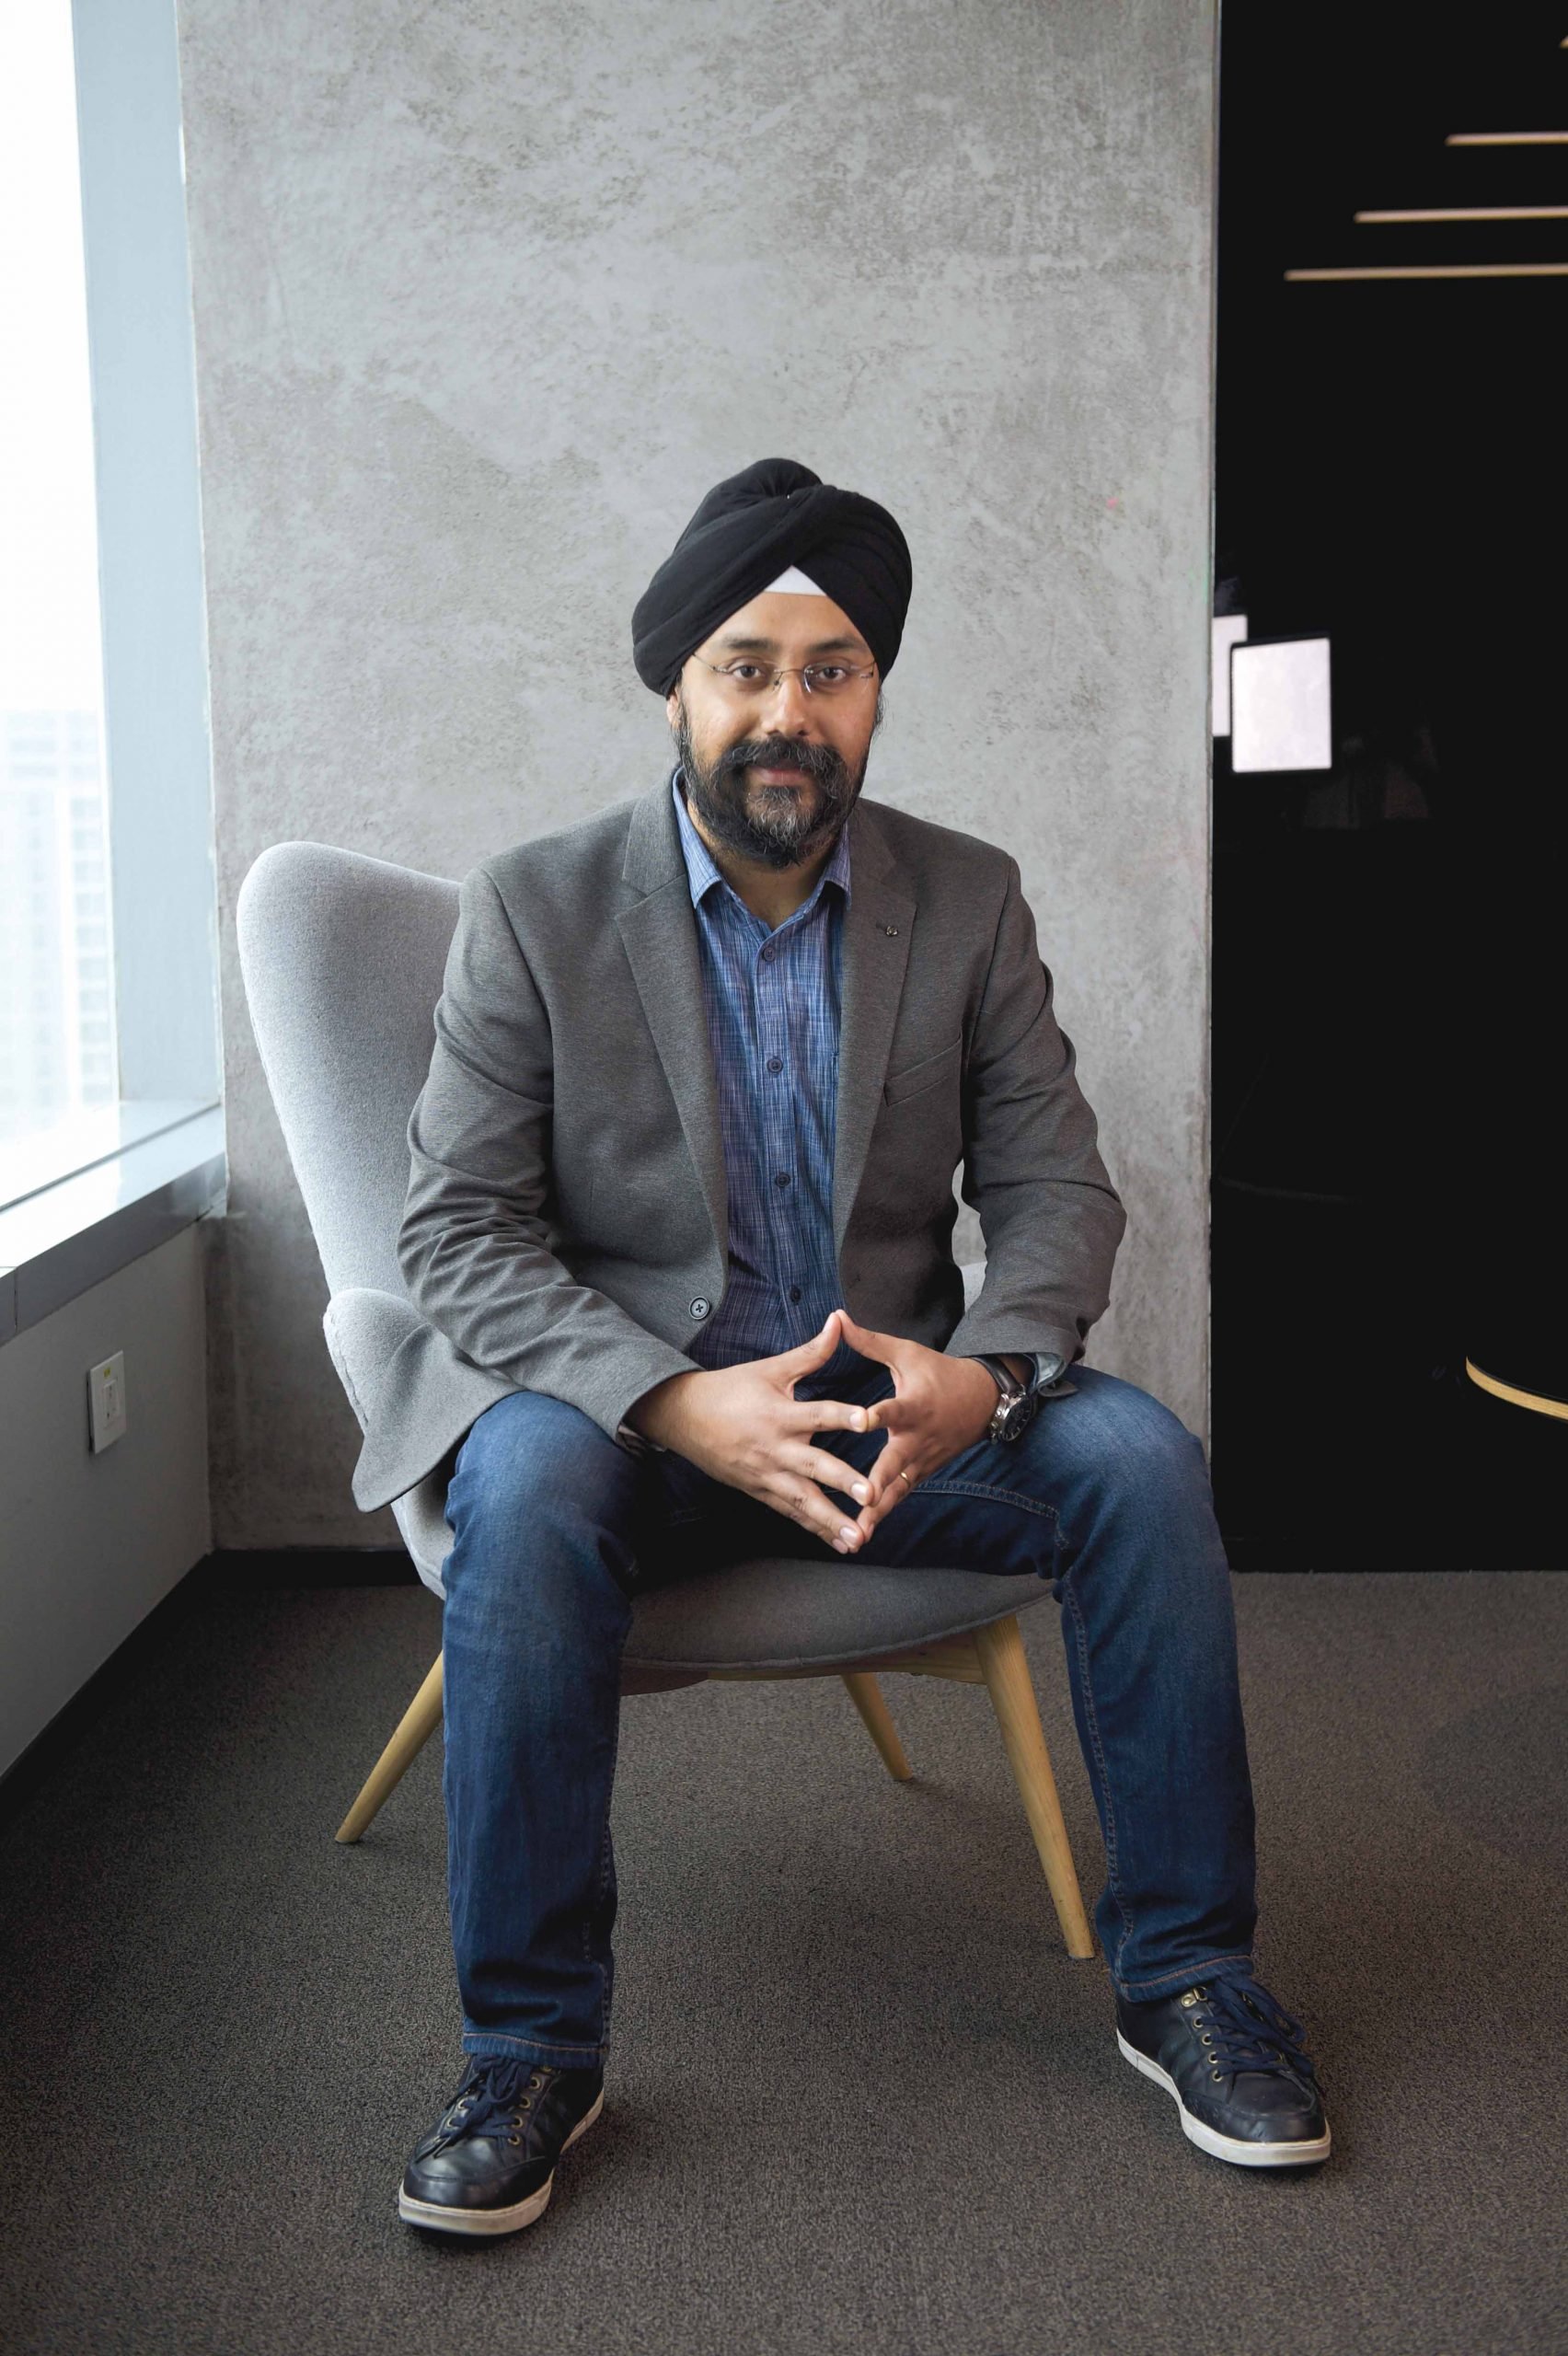 Prabhjeet Singh, President India and South Asia of Uber